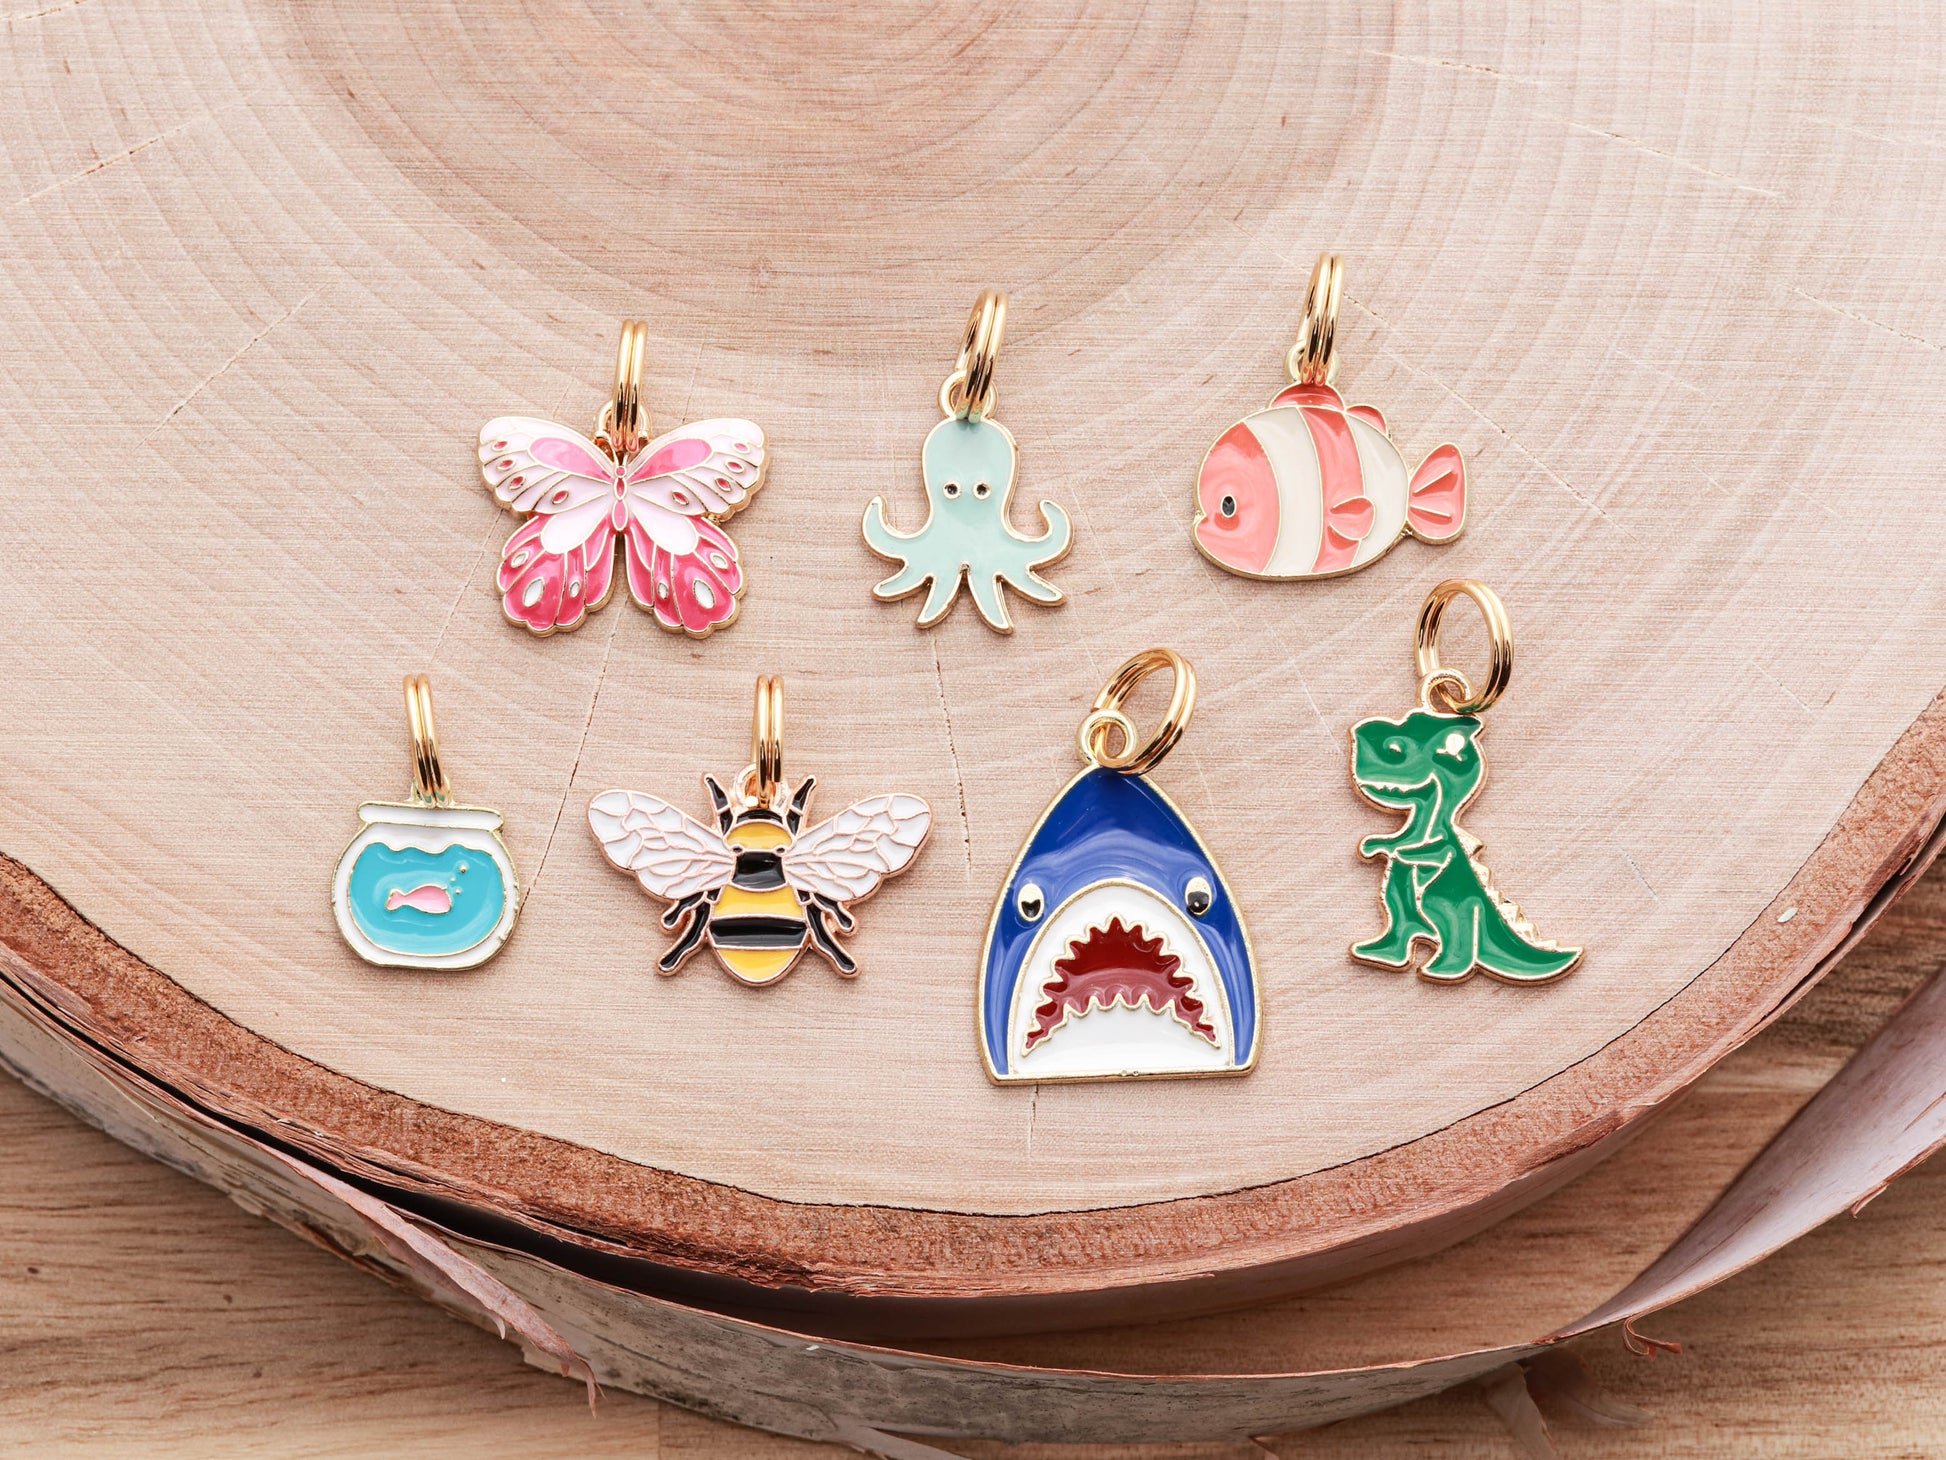 Lucky Tags Collar Charms are available in Bees, Butterflies, Dinosaurs, Fish, Fish Bowls, Octopus, and Sharks